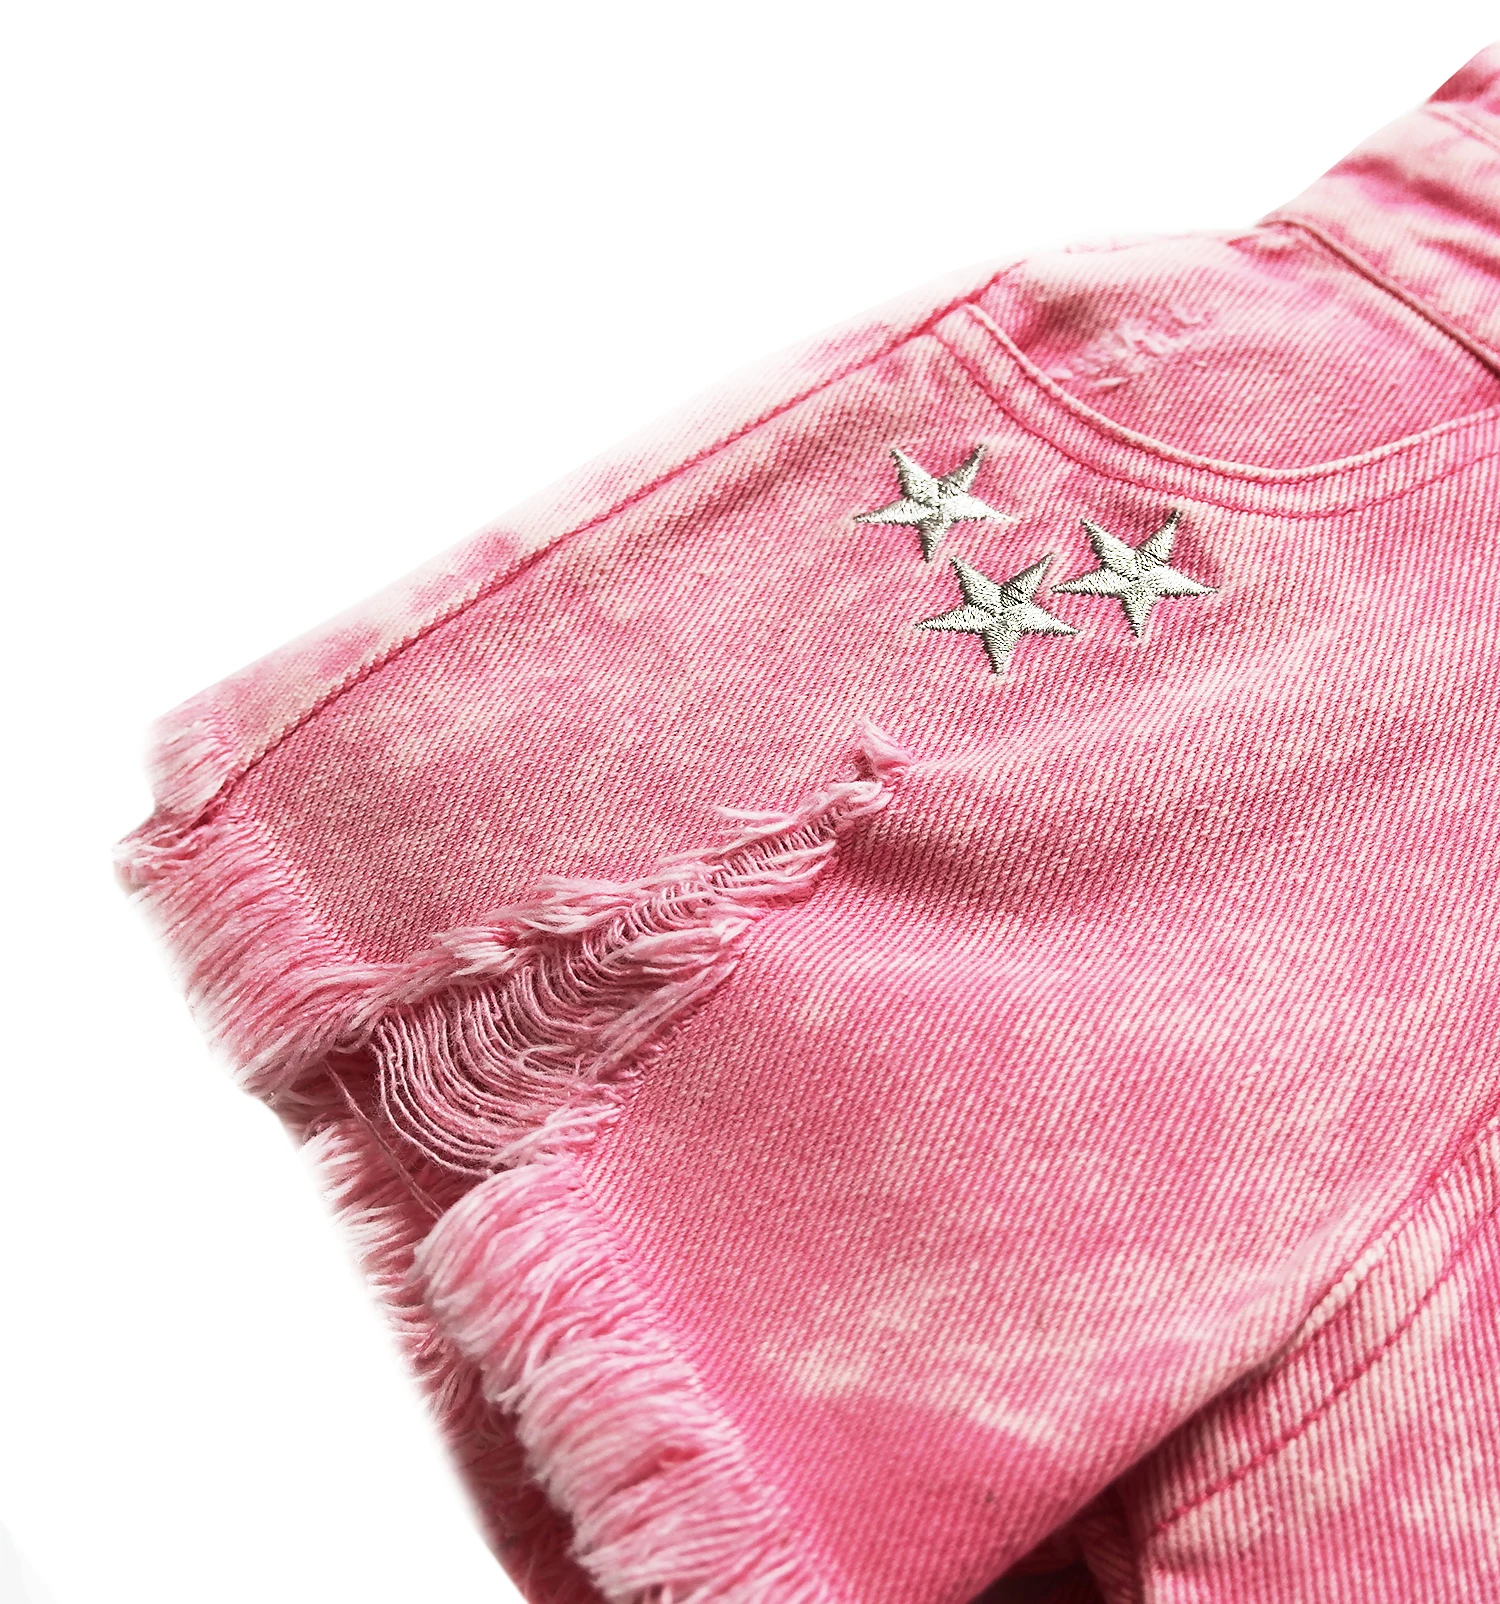 Chumhey 0-11T Summer Children's Clothing Sets Jeans For Girls Pants Kids Denim Overalls Suspender Shorts Pink Jumpsuit Trousers images - 6